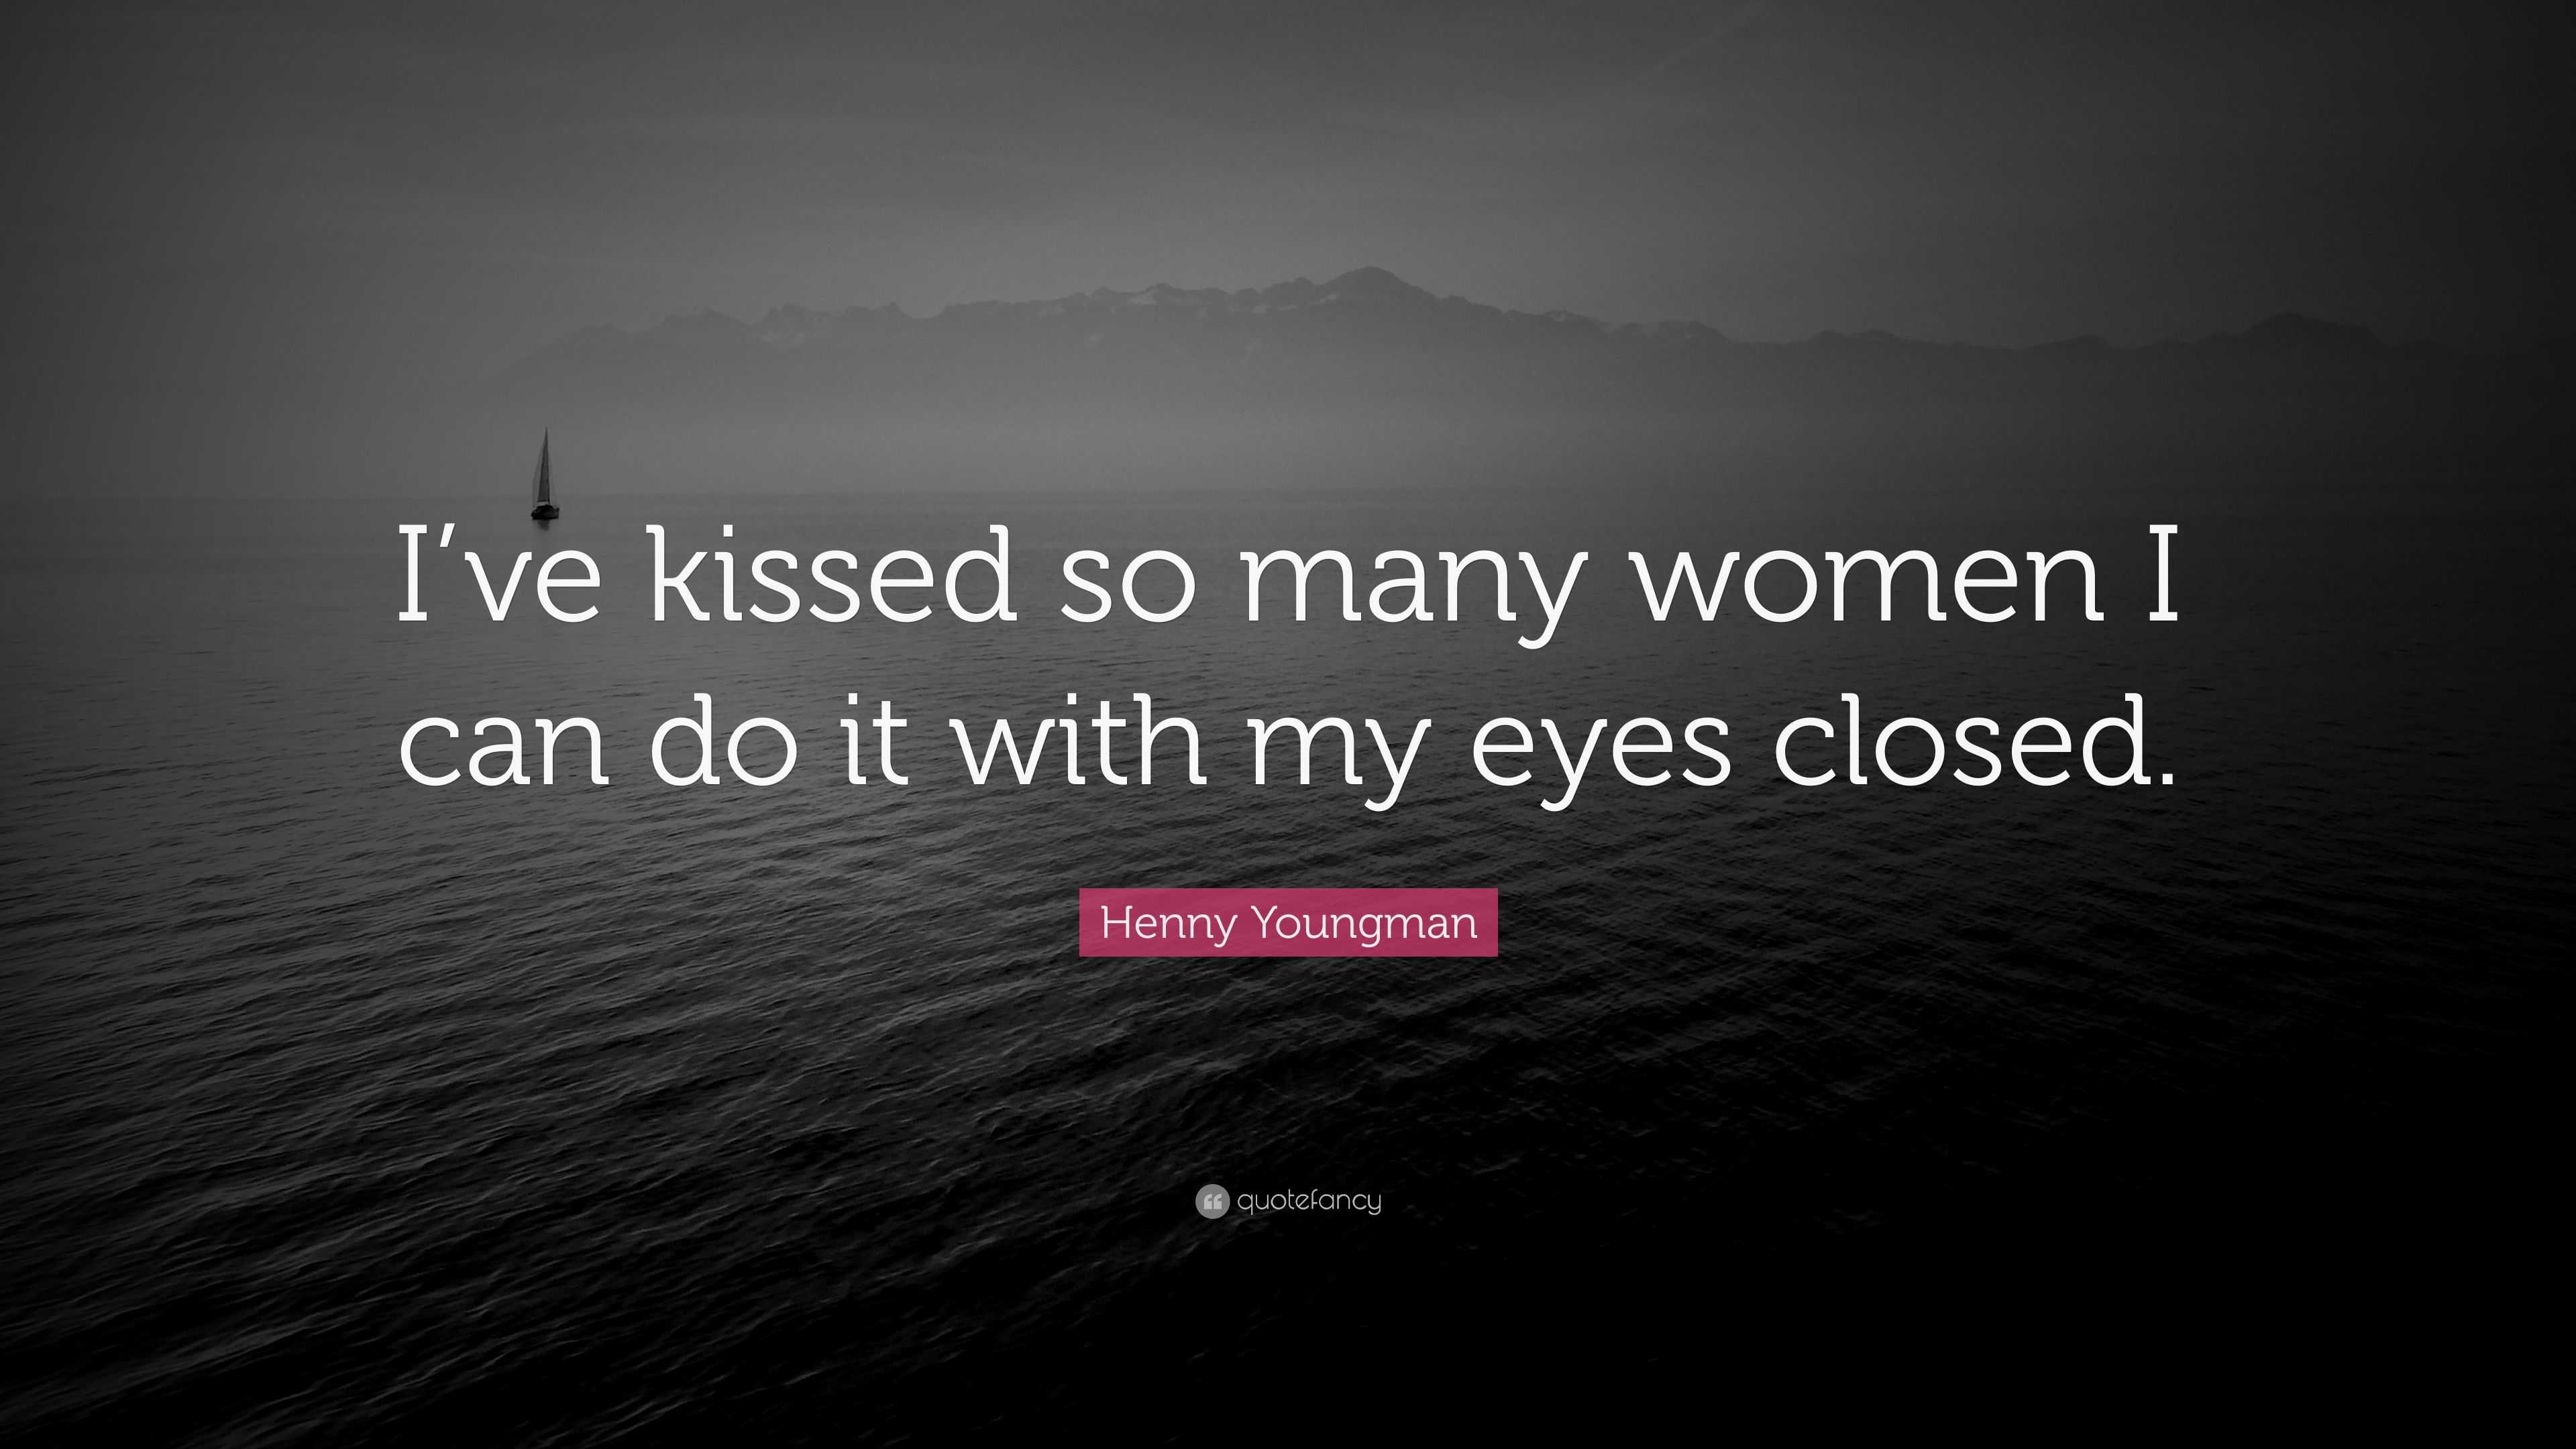 Henny Youngman Quote Ive Kissed So Many Women I Can Do It With My Eyes Closed”